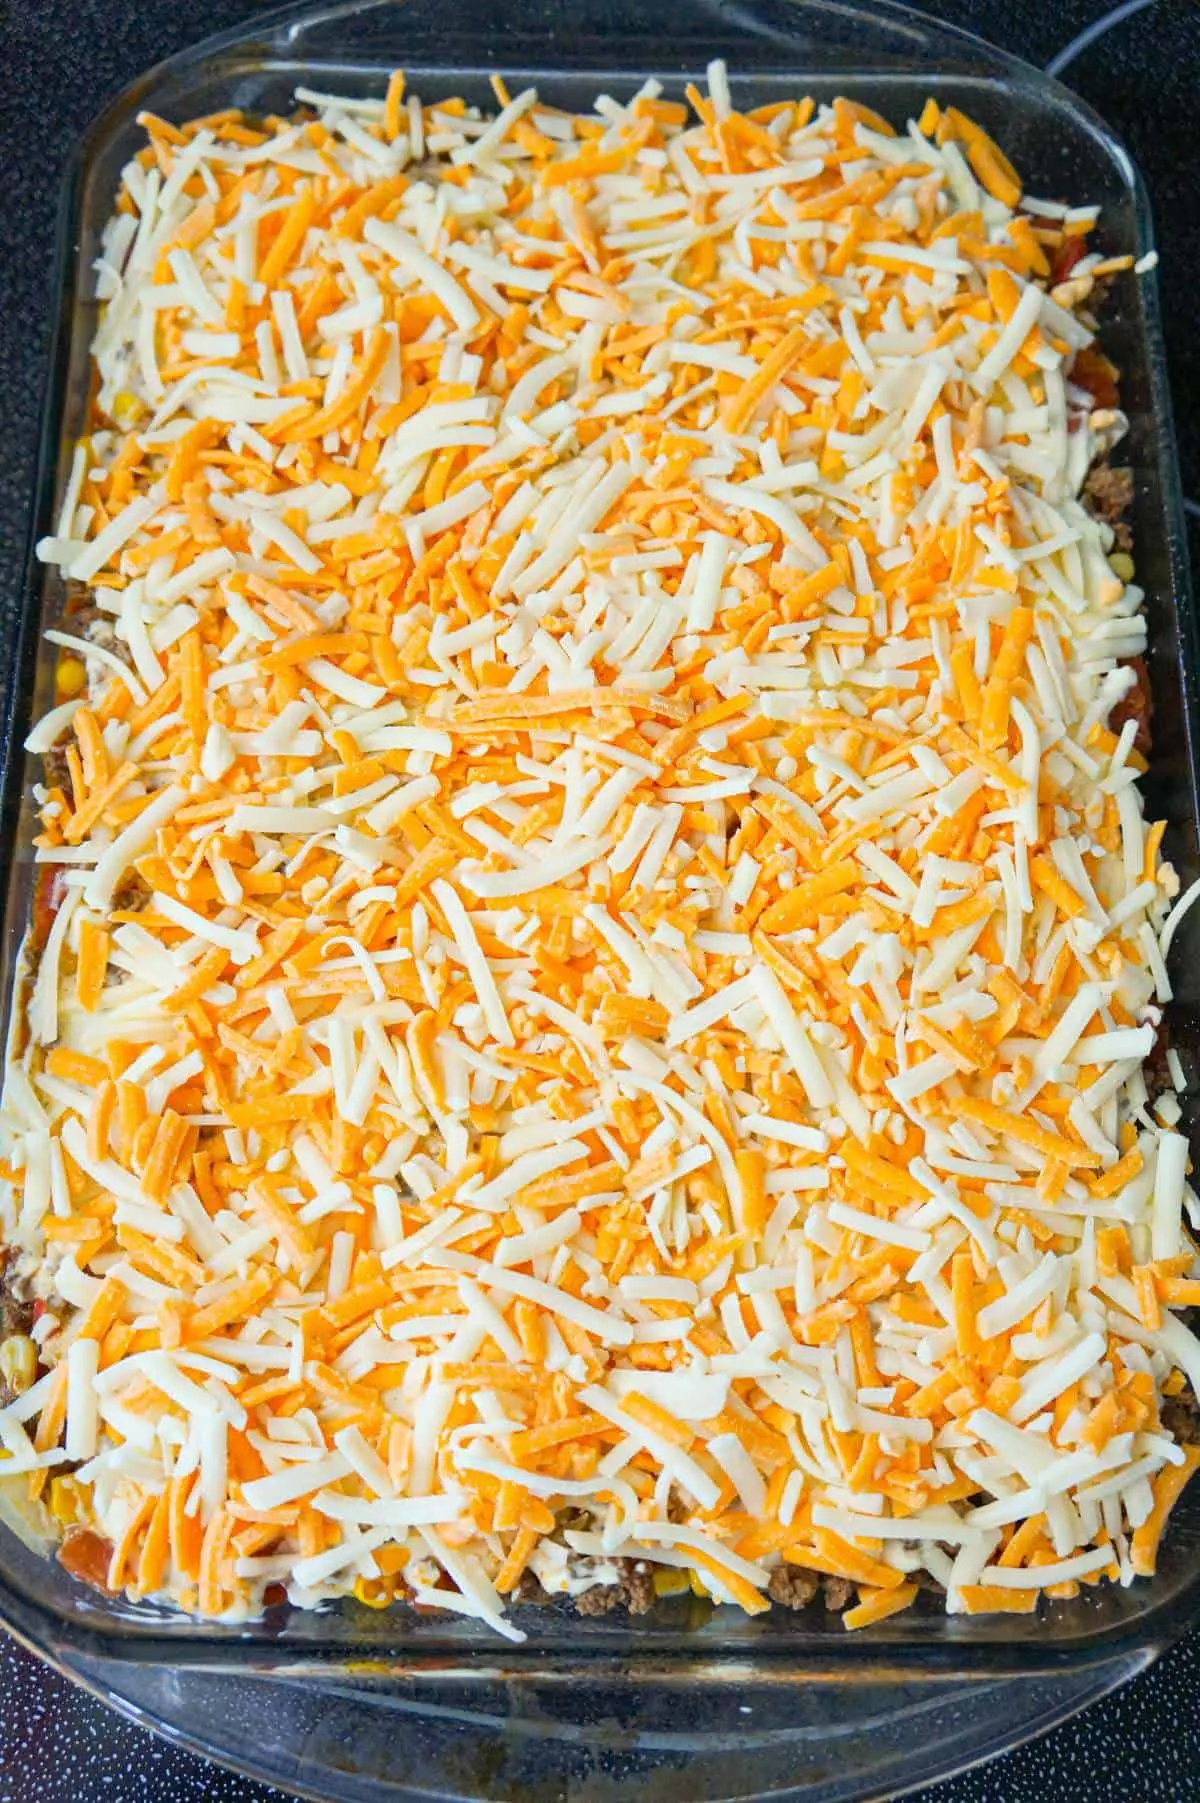 shredded cheddar and mozzarella cheese on top of beef and and biscuit casserole before baking